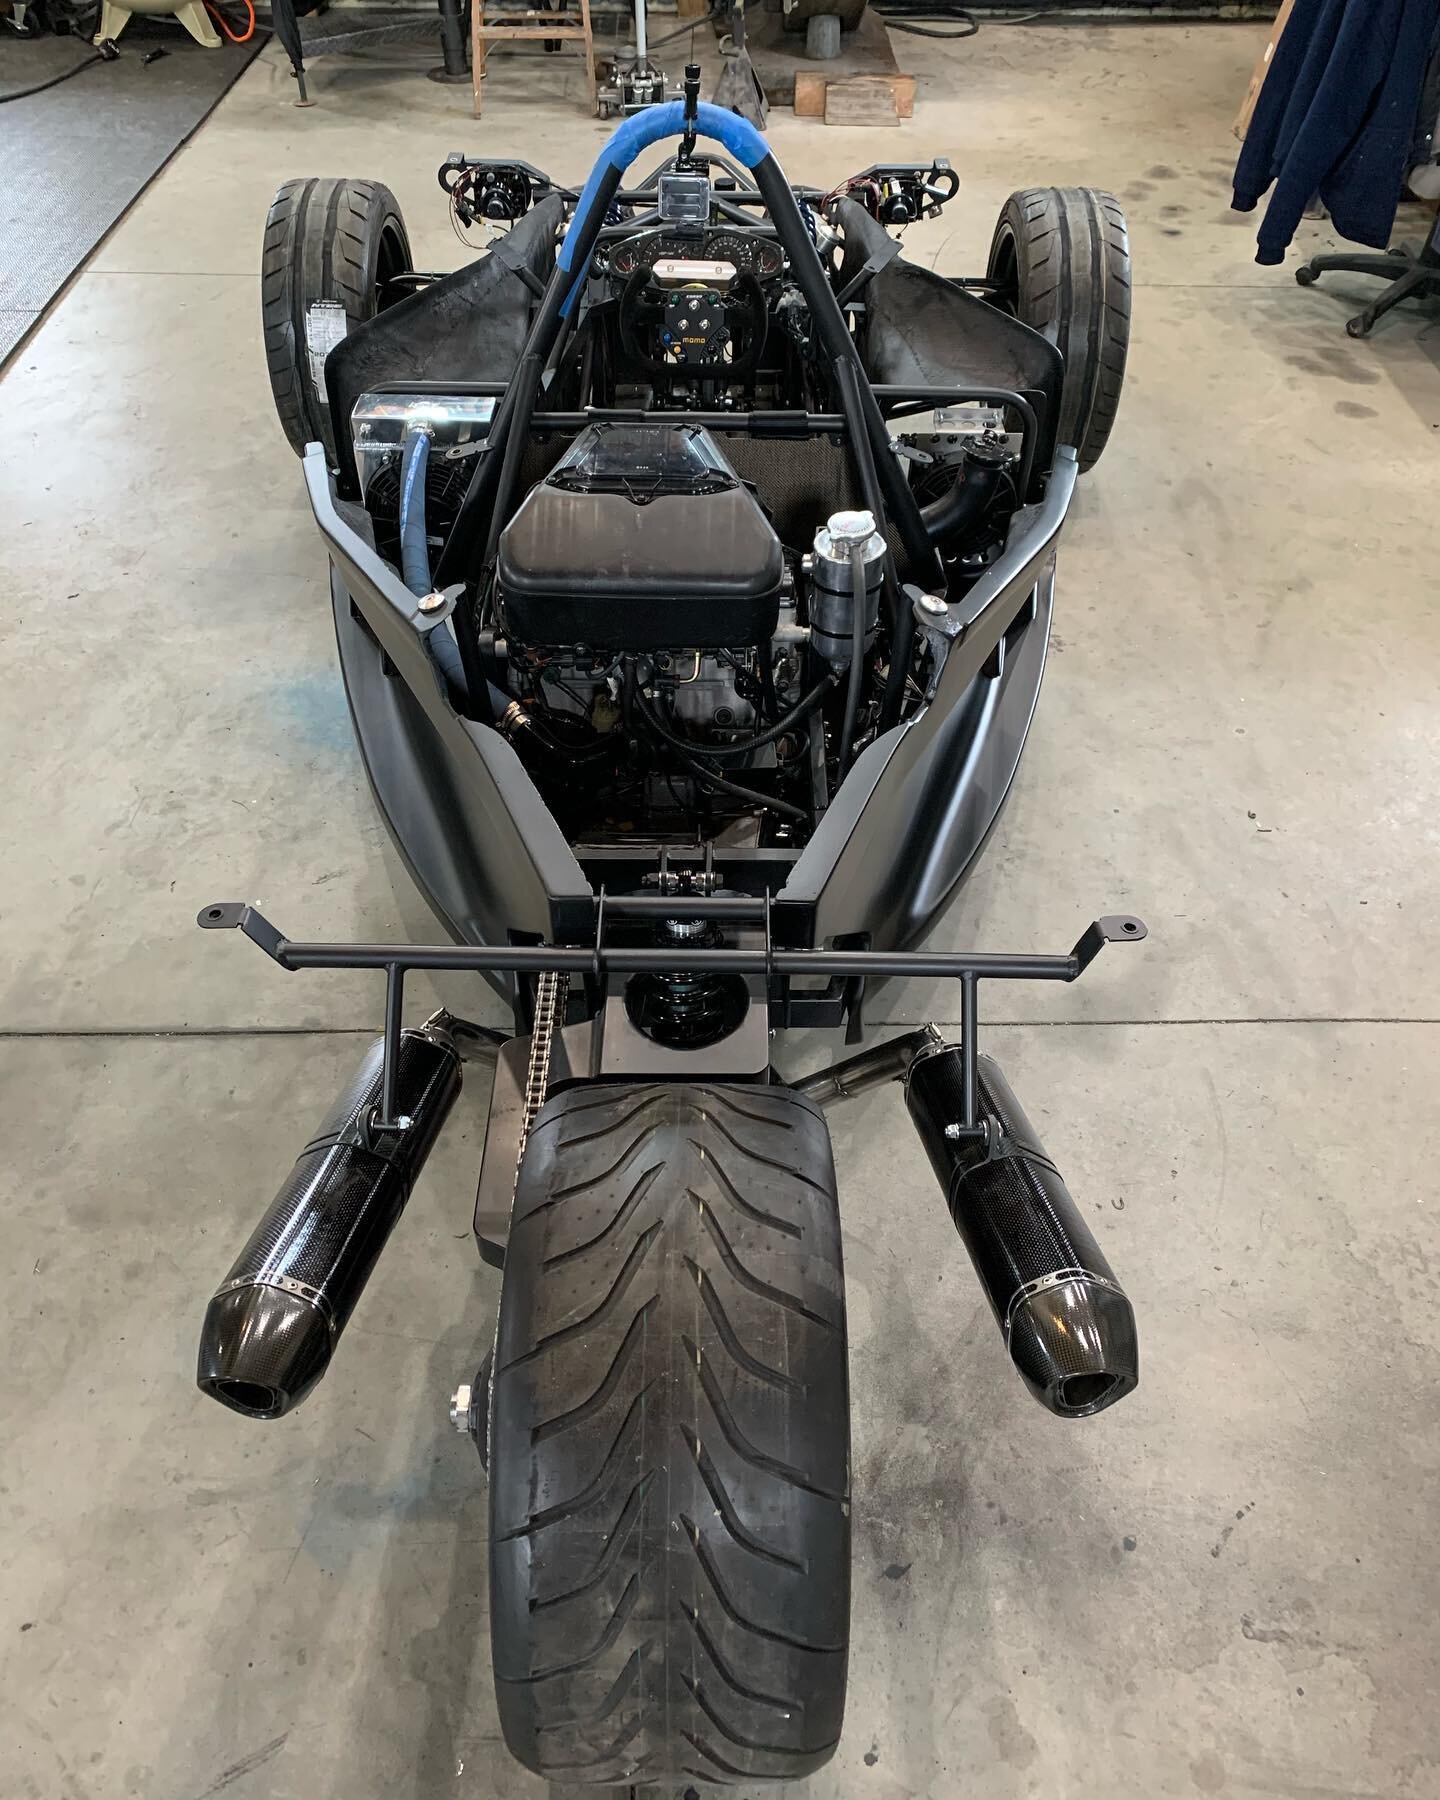 Throwback to April last year when we were in final assembly on the Corso California RT prototype!

Our custom billet single-sided swingarm allows fitment of a 305 tire outback on an automotive rim. 
&bull;
#corsoconcepts #corsocalifornia #corsocalifo